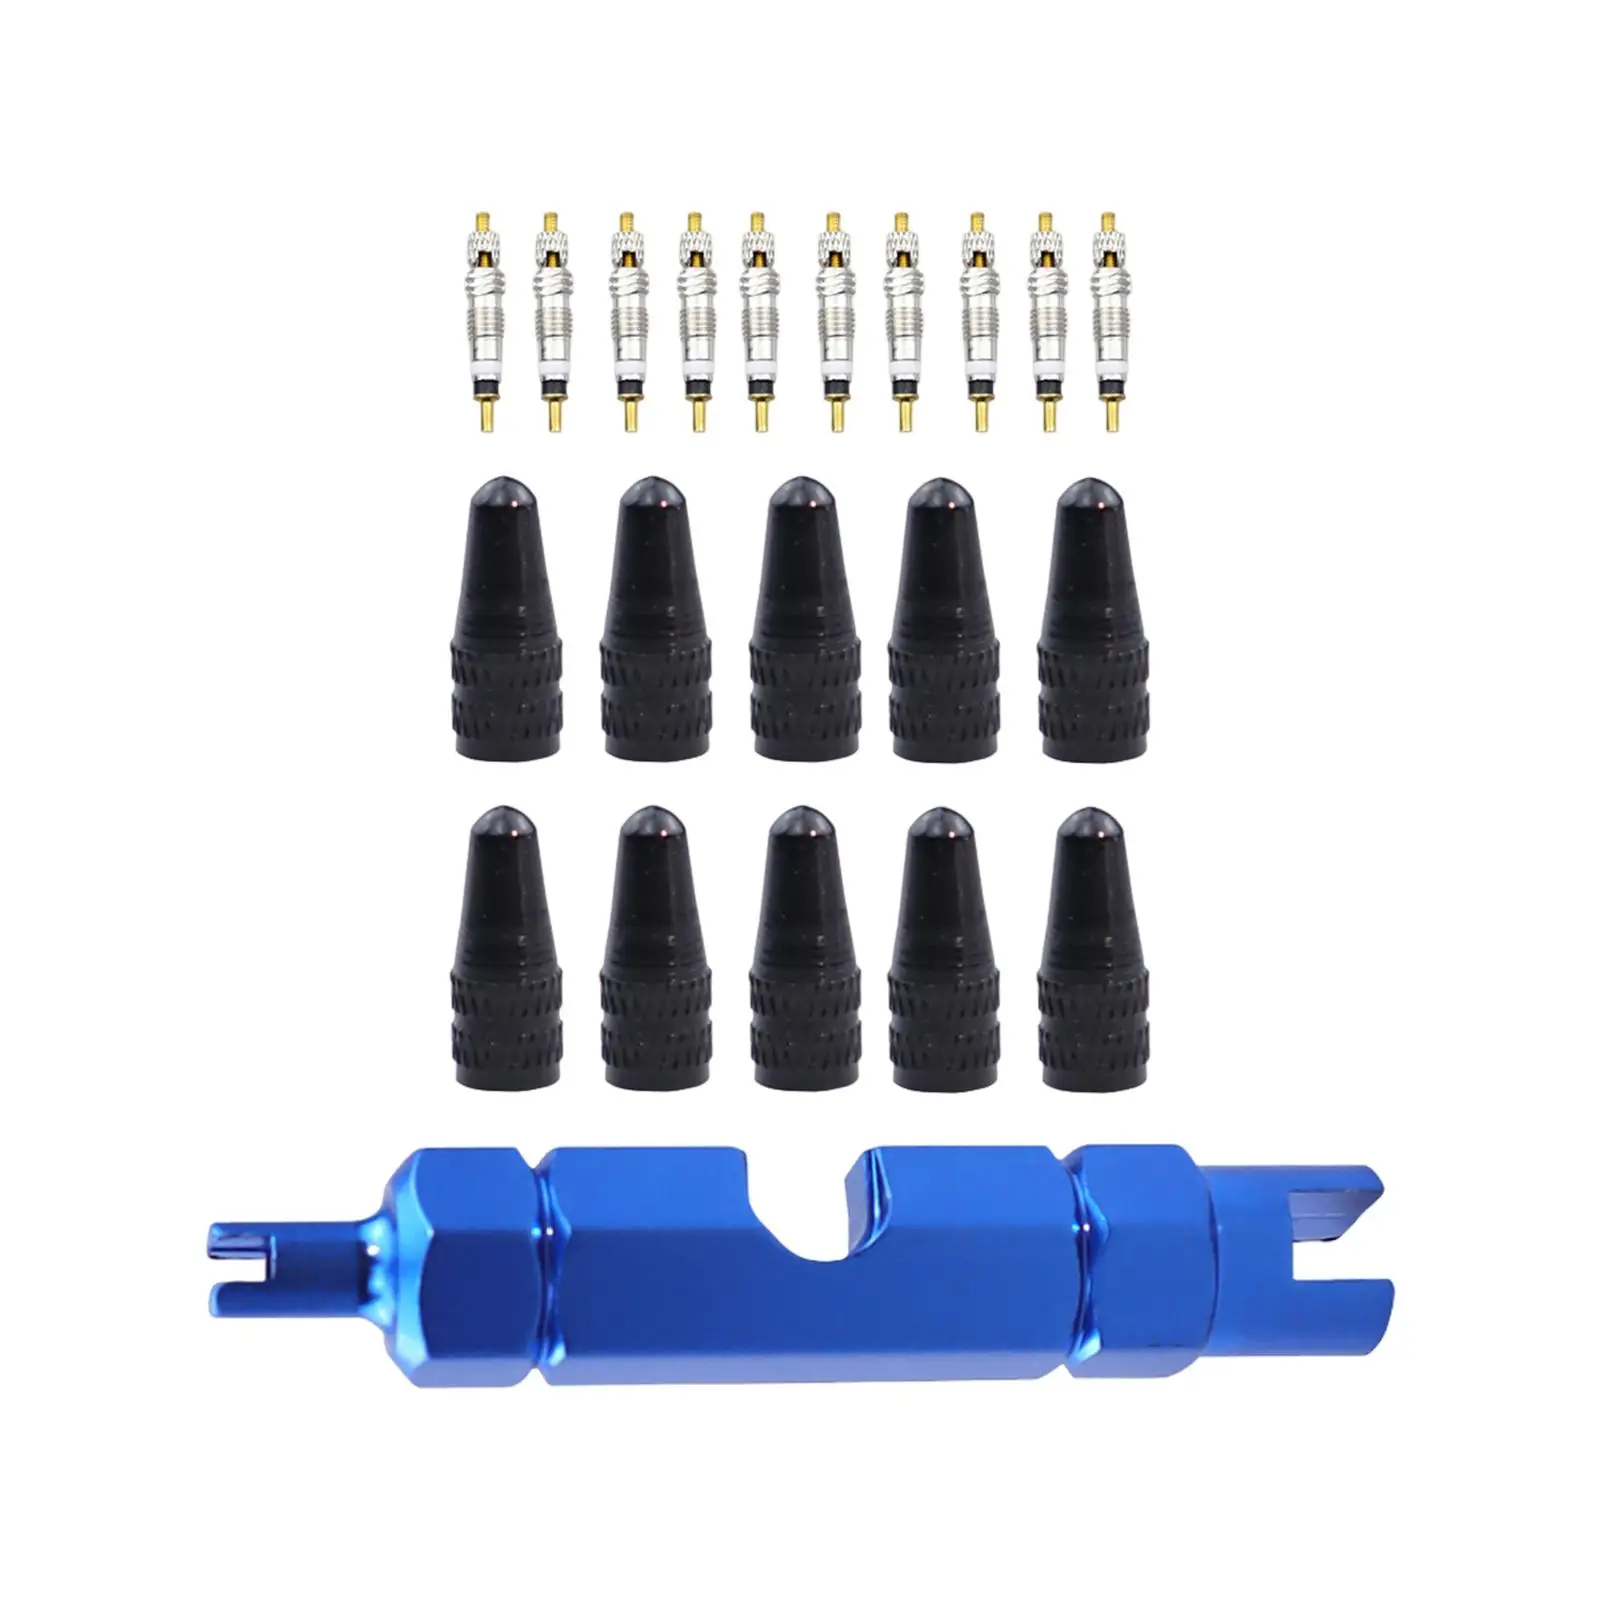 Tire Valve Stem Removal Tool Kit Professional Automobile Repairing Accessory Durable Tire Repair Tool Valve Core Wrench